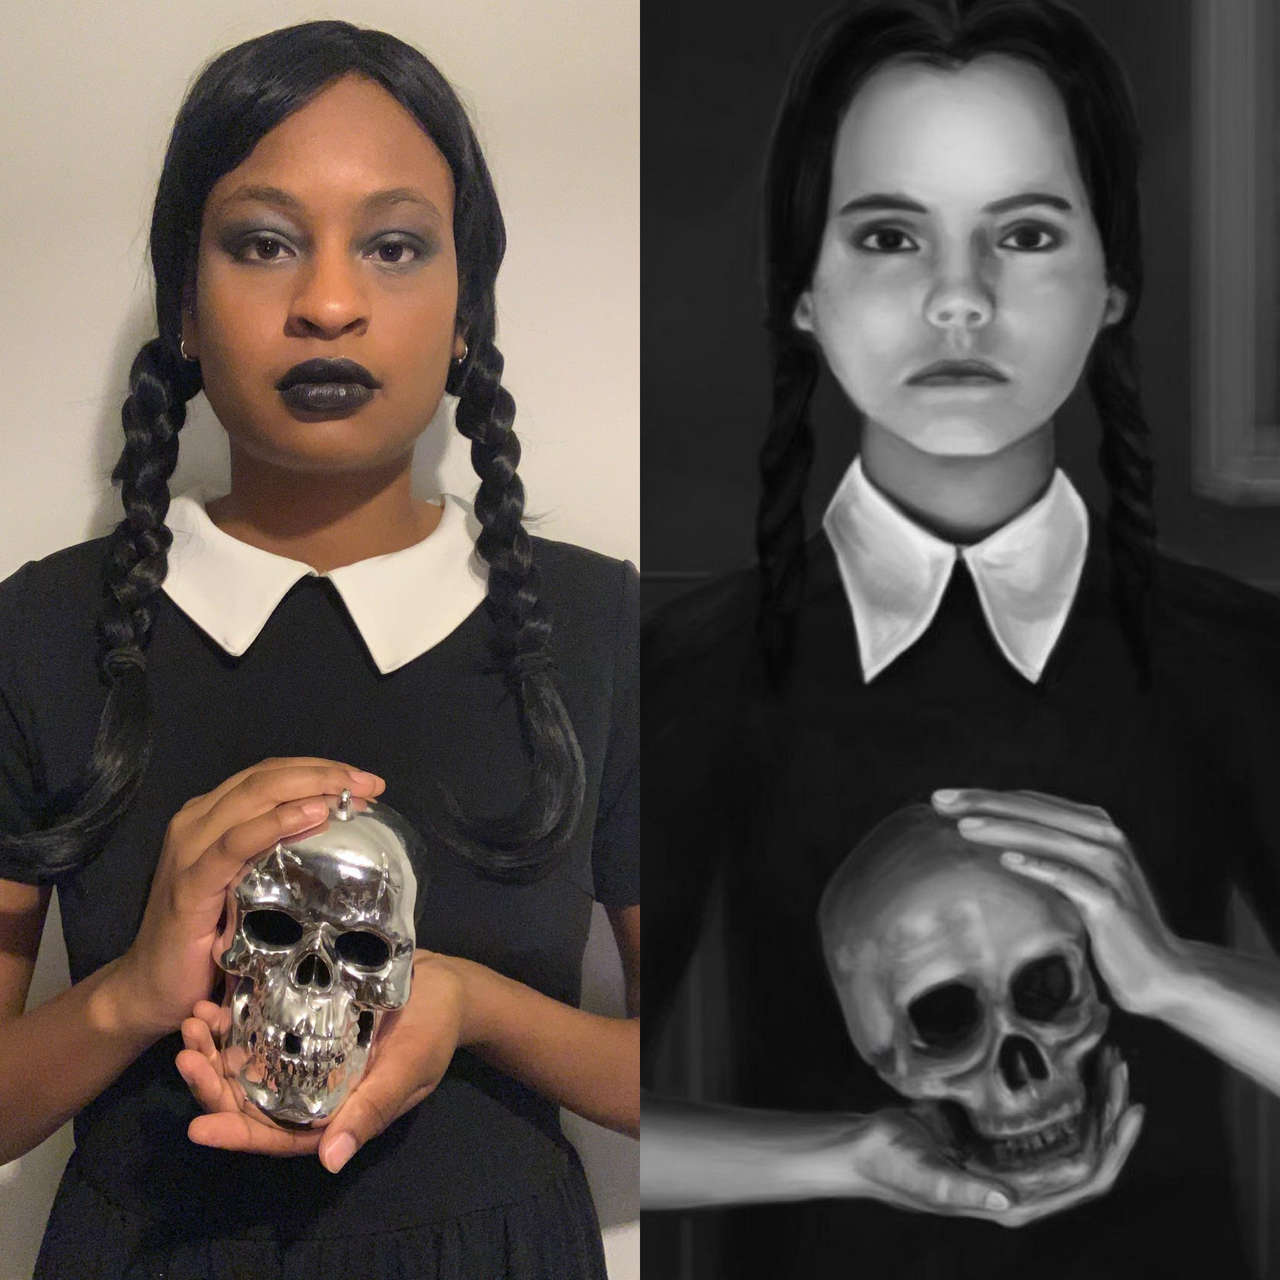 Wednesday Addams From The Addams Family By Tyliecospla